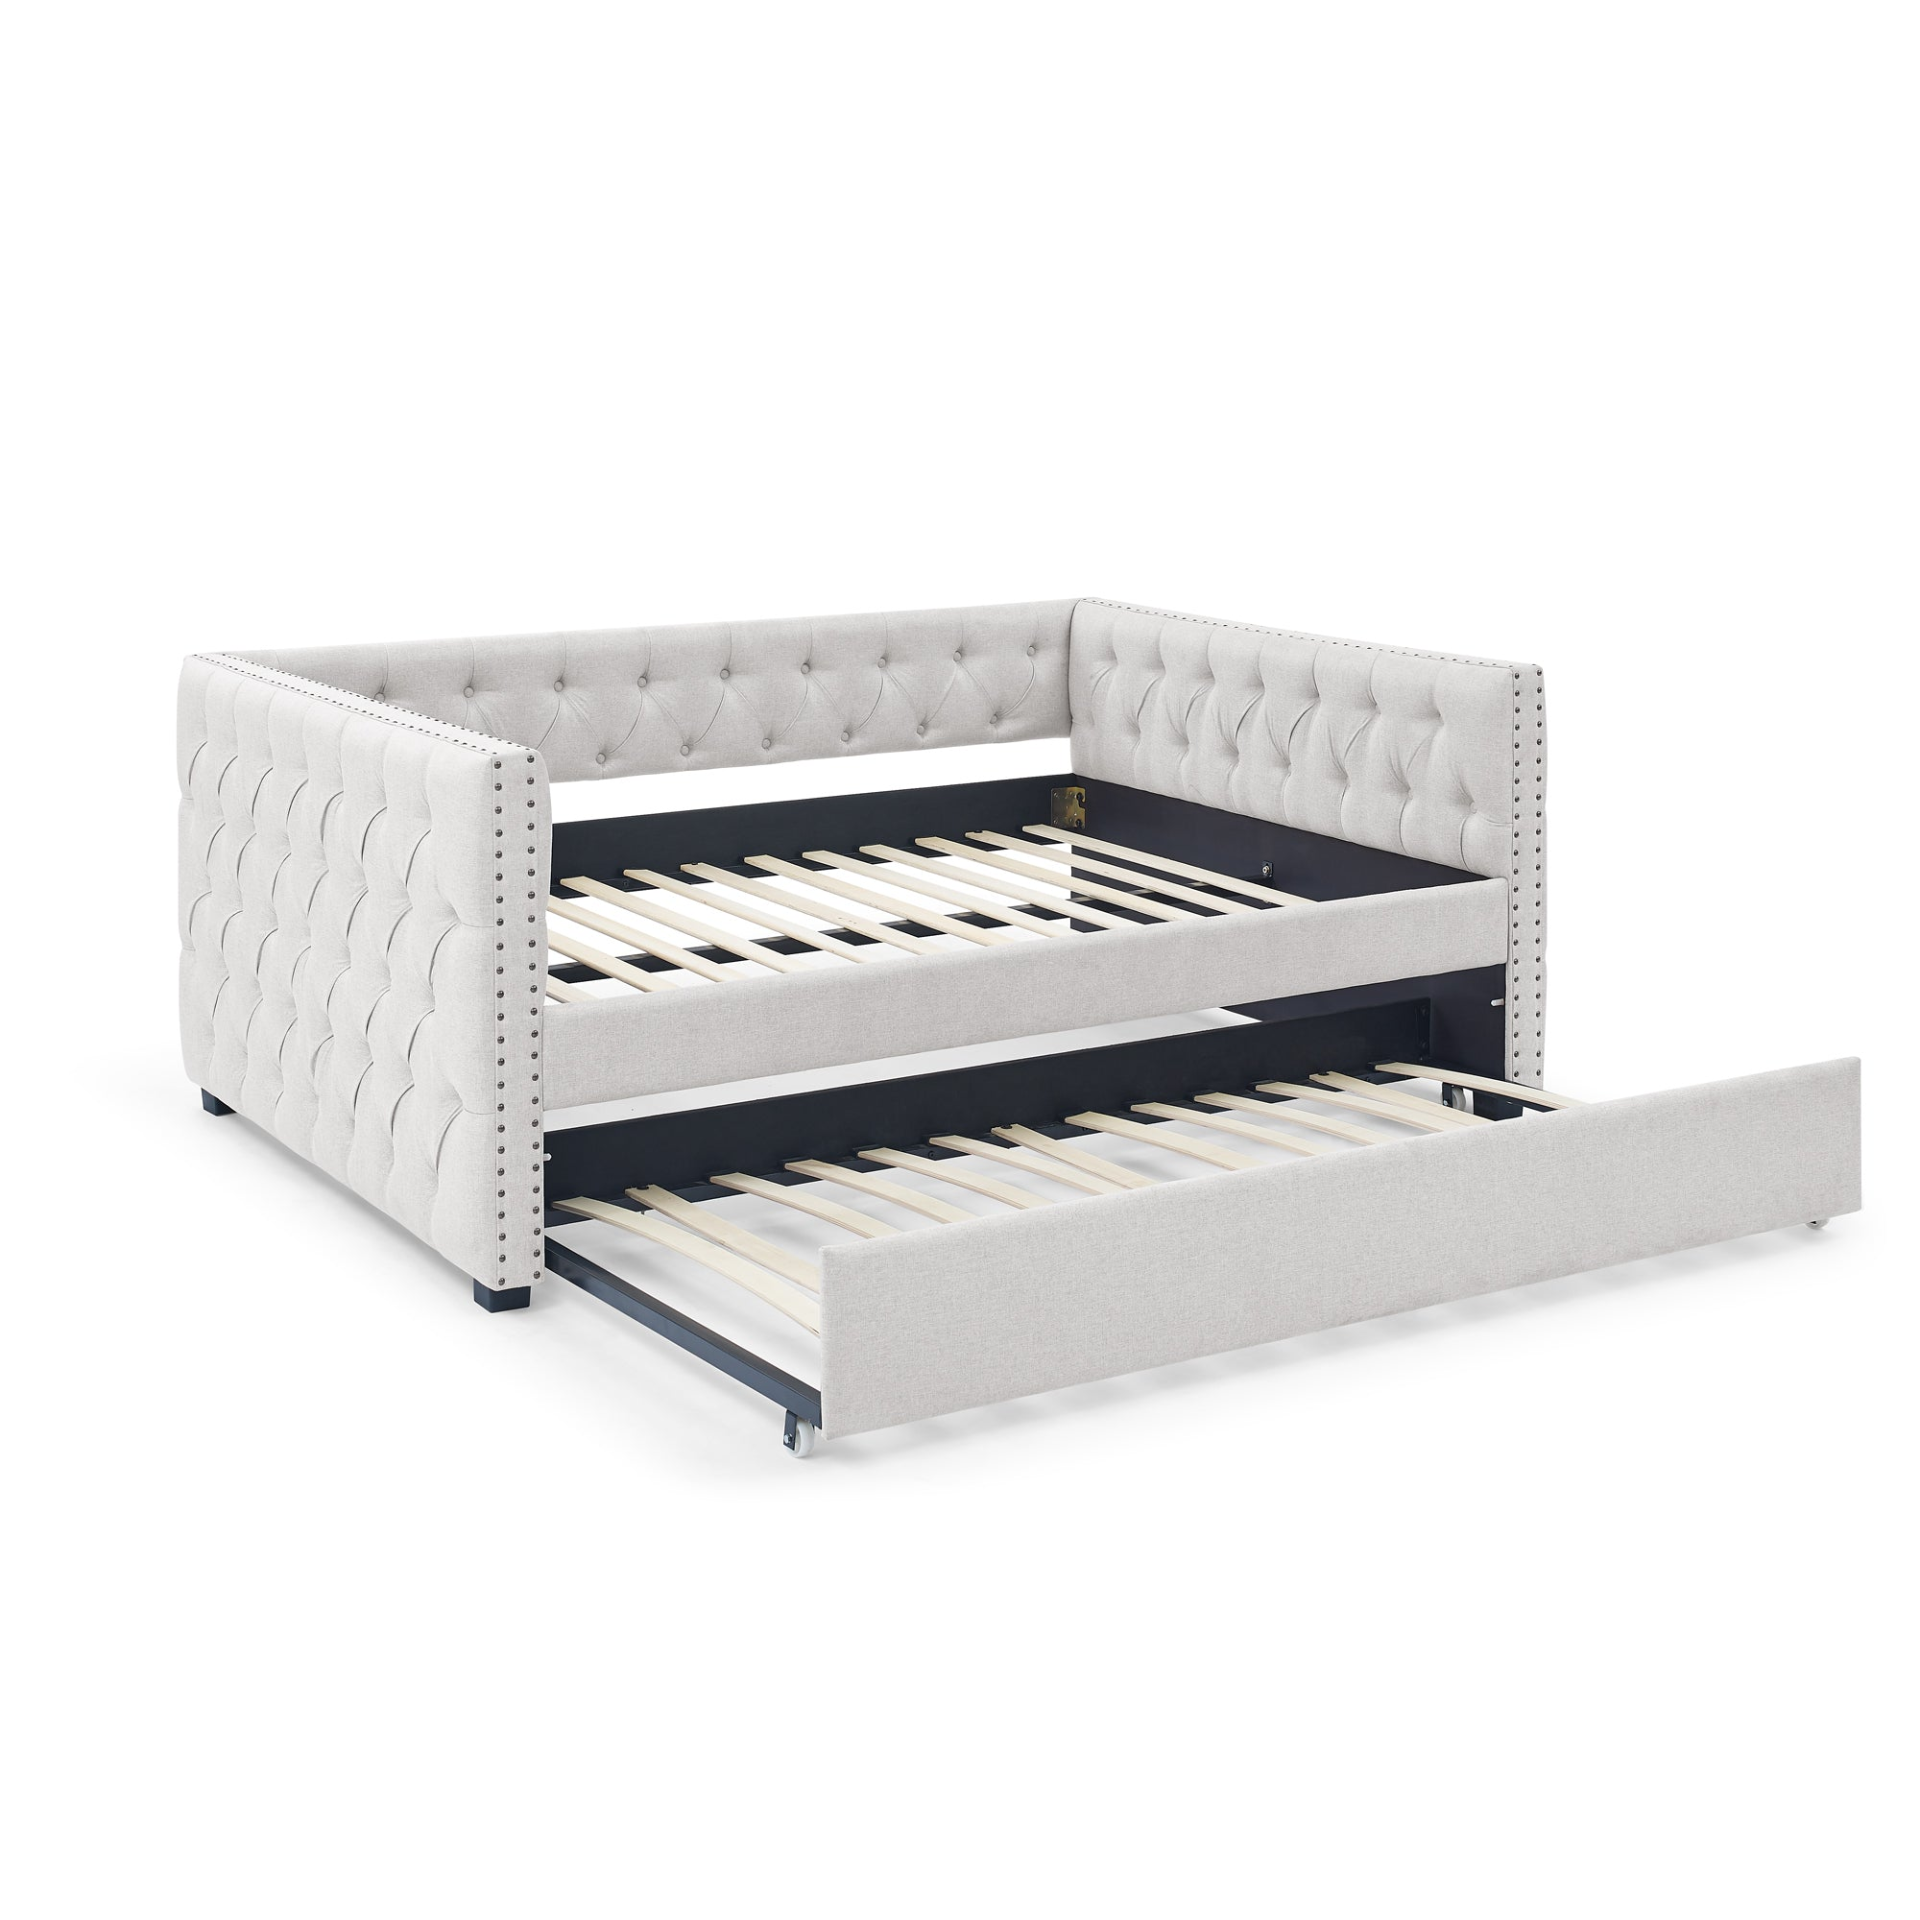 Beige - Button Tufted Daybed Sofa with Pull-Out Trundle - Full Size Daybed & Twin Trundle (85"x57"x31.5")